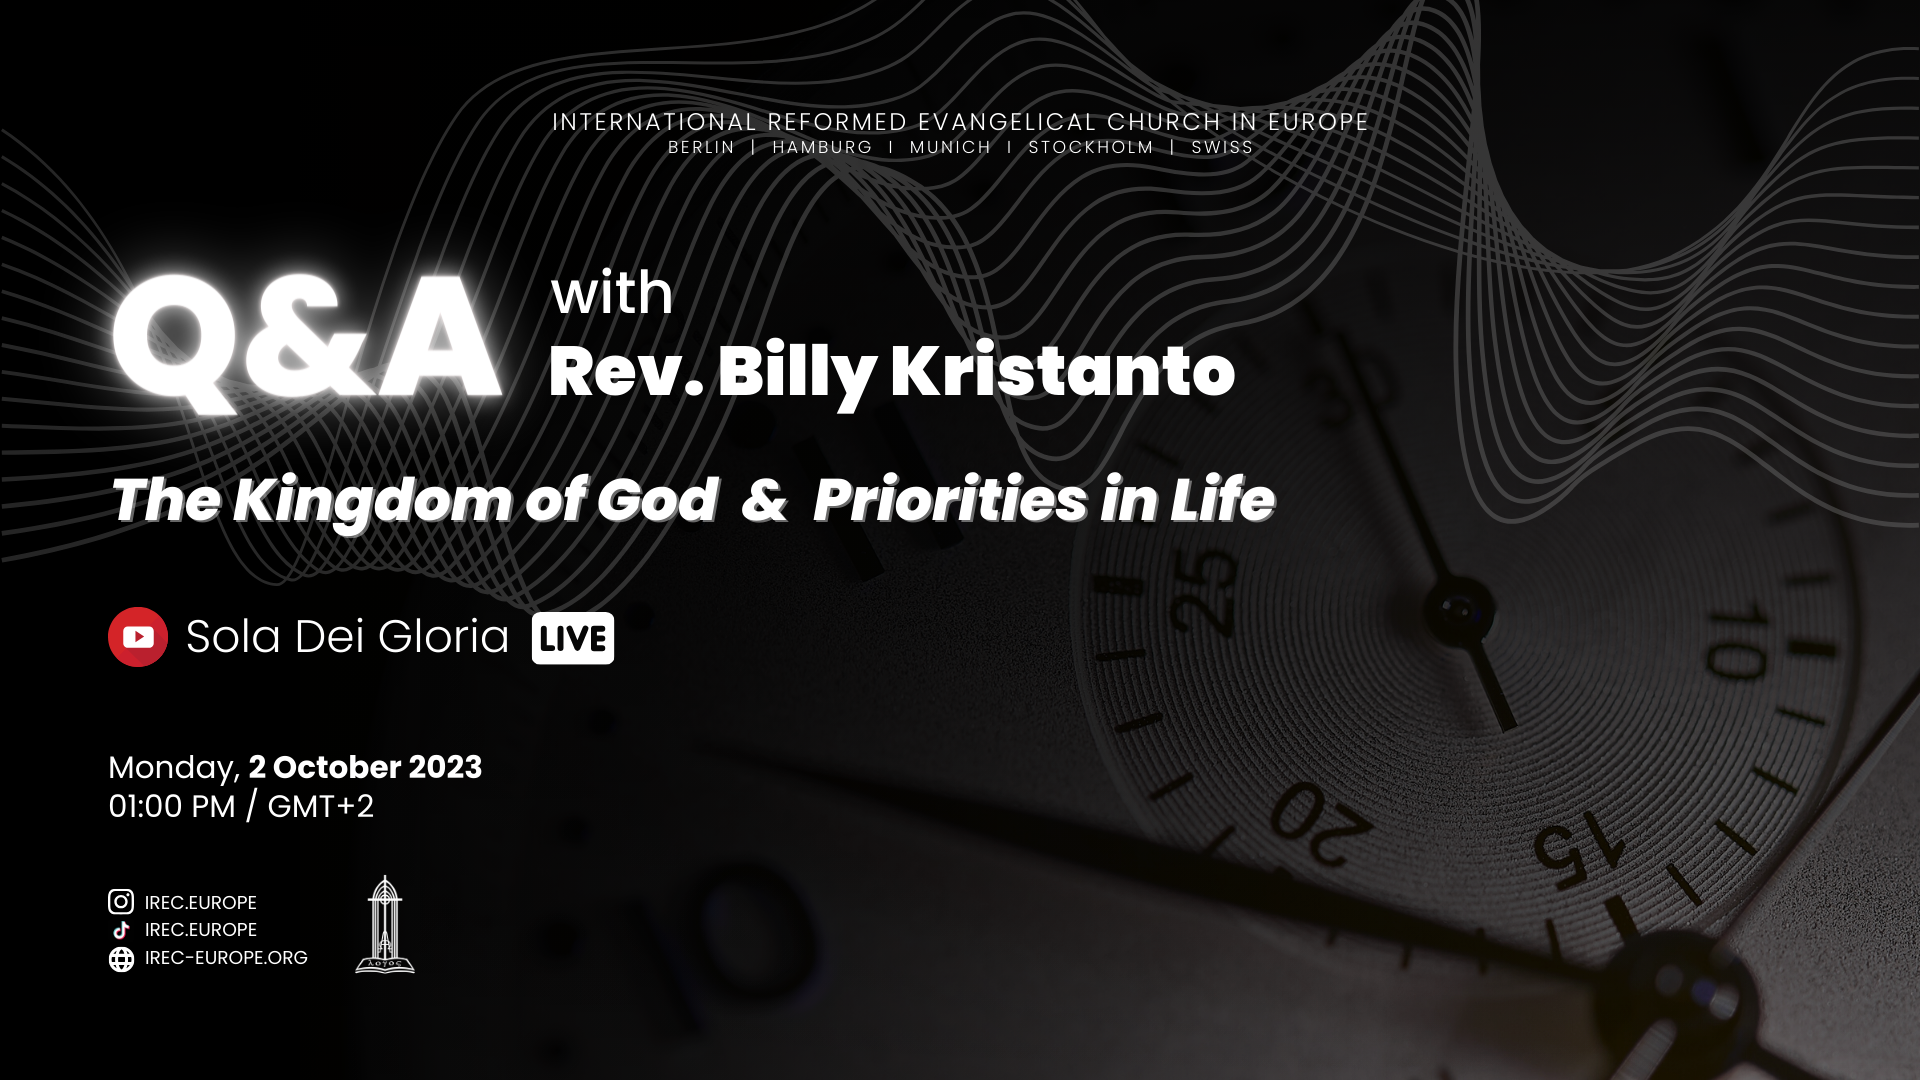 Q&A: The Kingdom of God & Priorities in Life